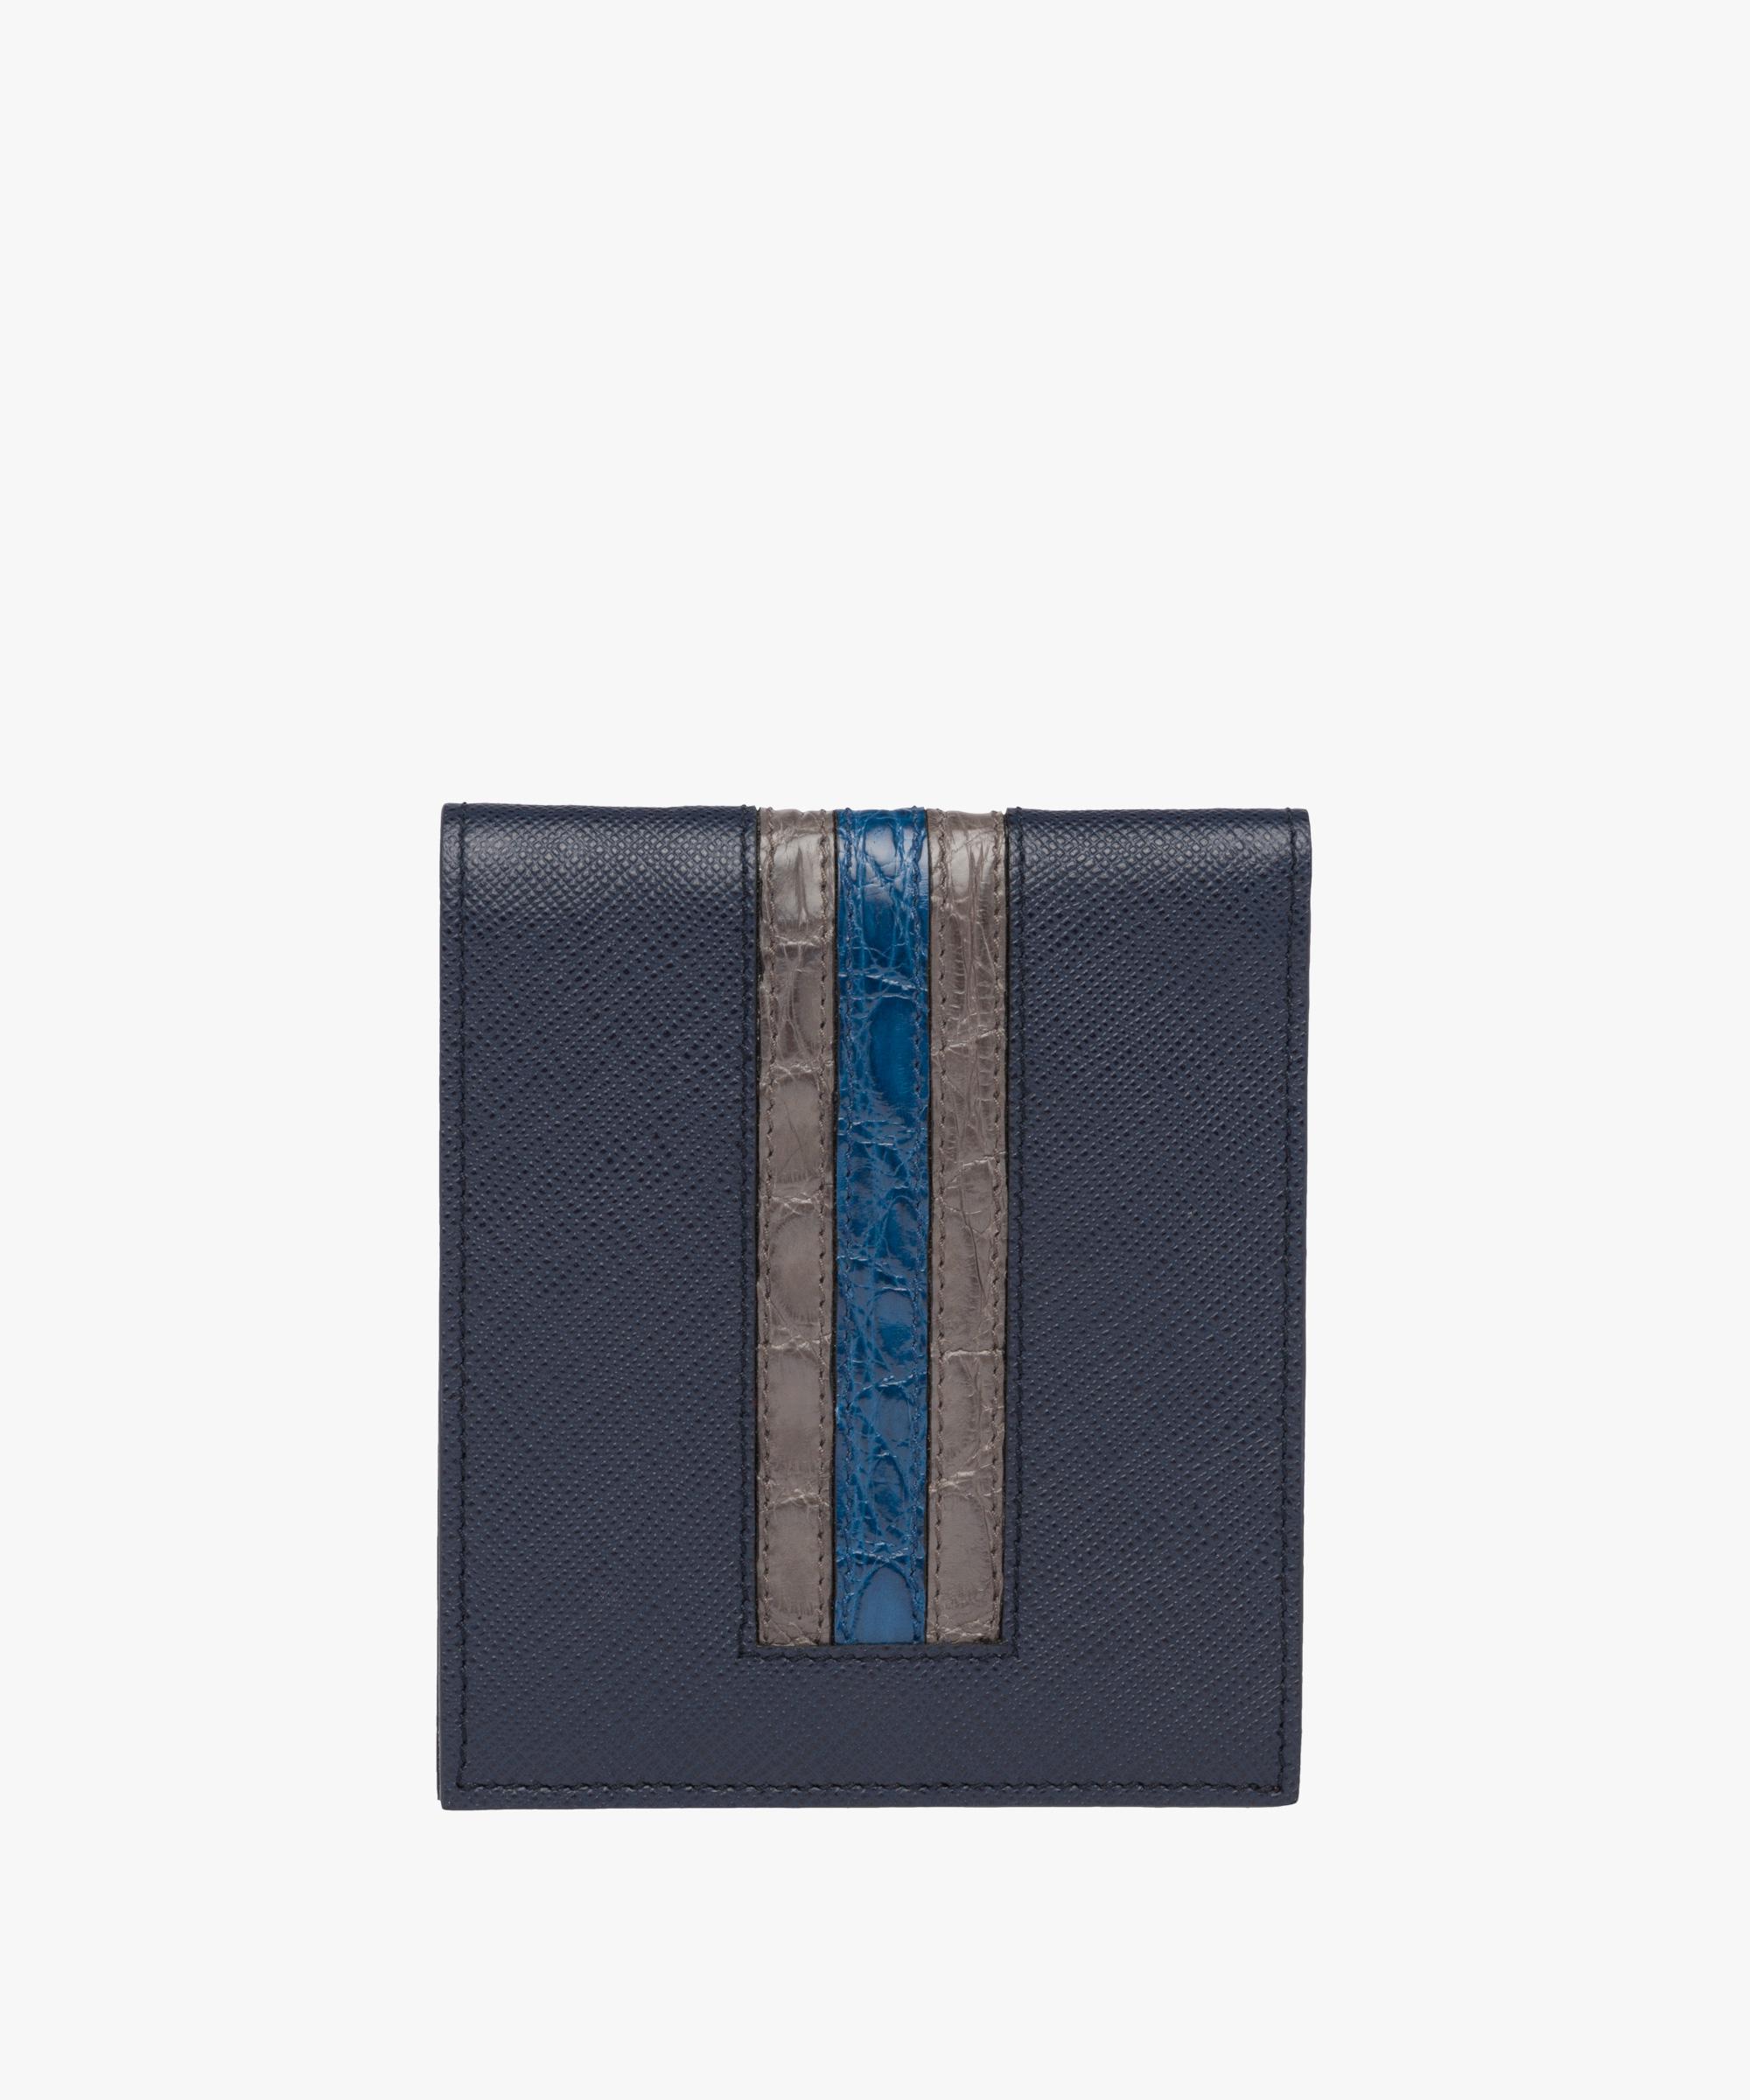 Prada Saffiano And Crocodile Leather Wallet in Blue for Men | Lyst